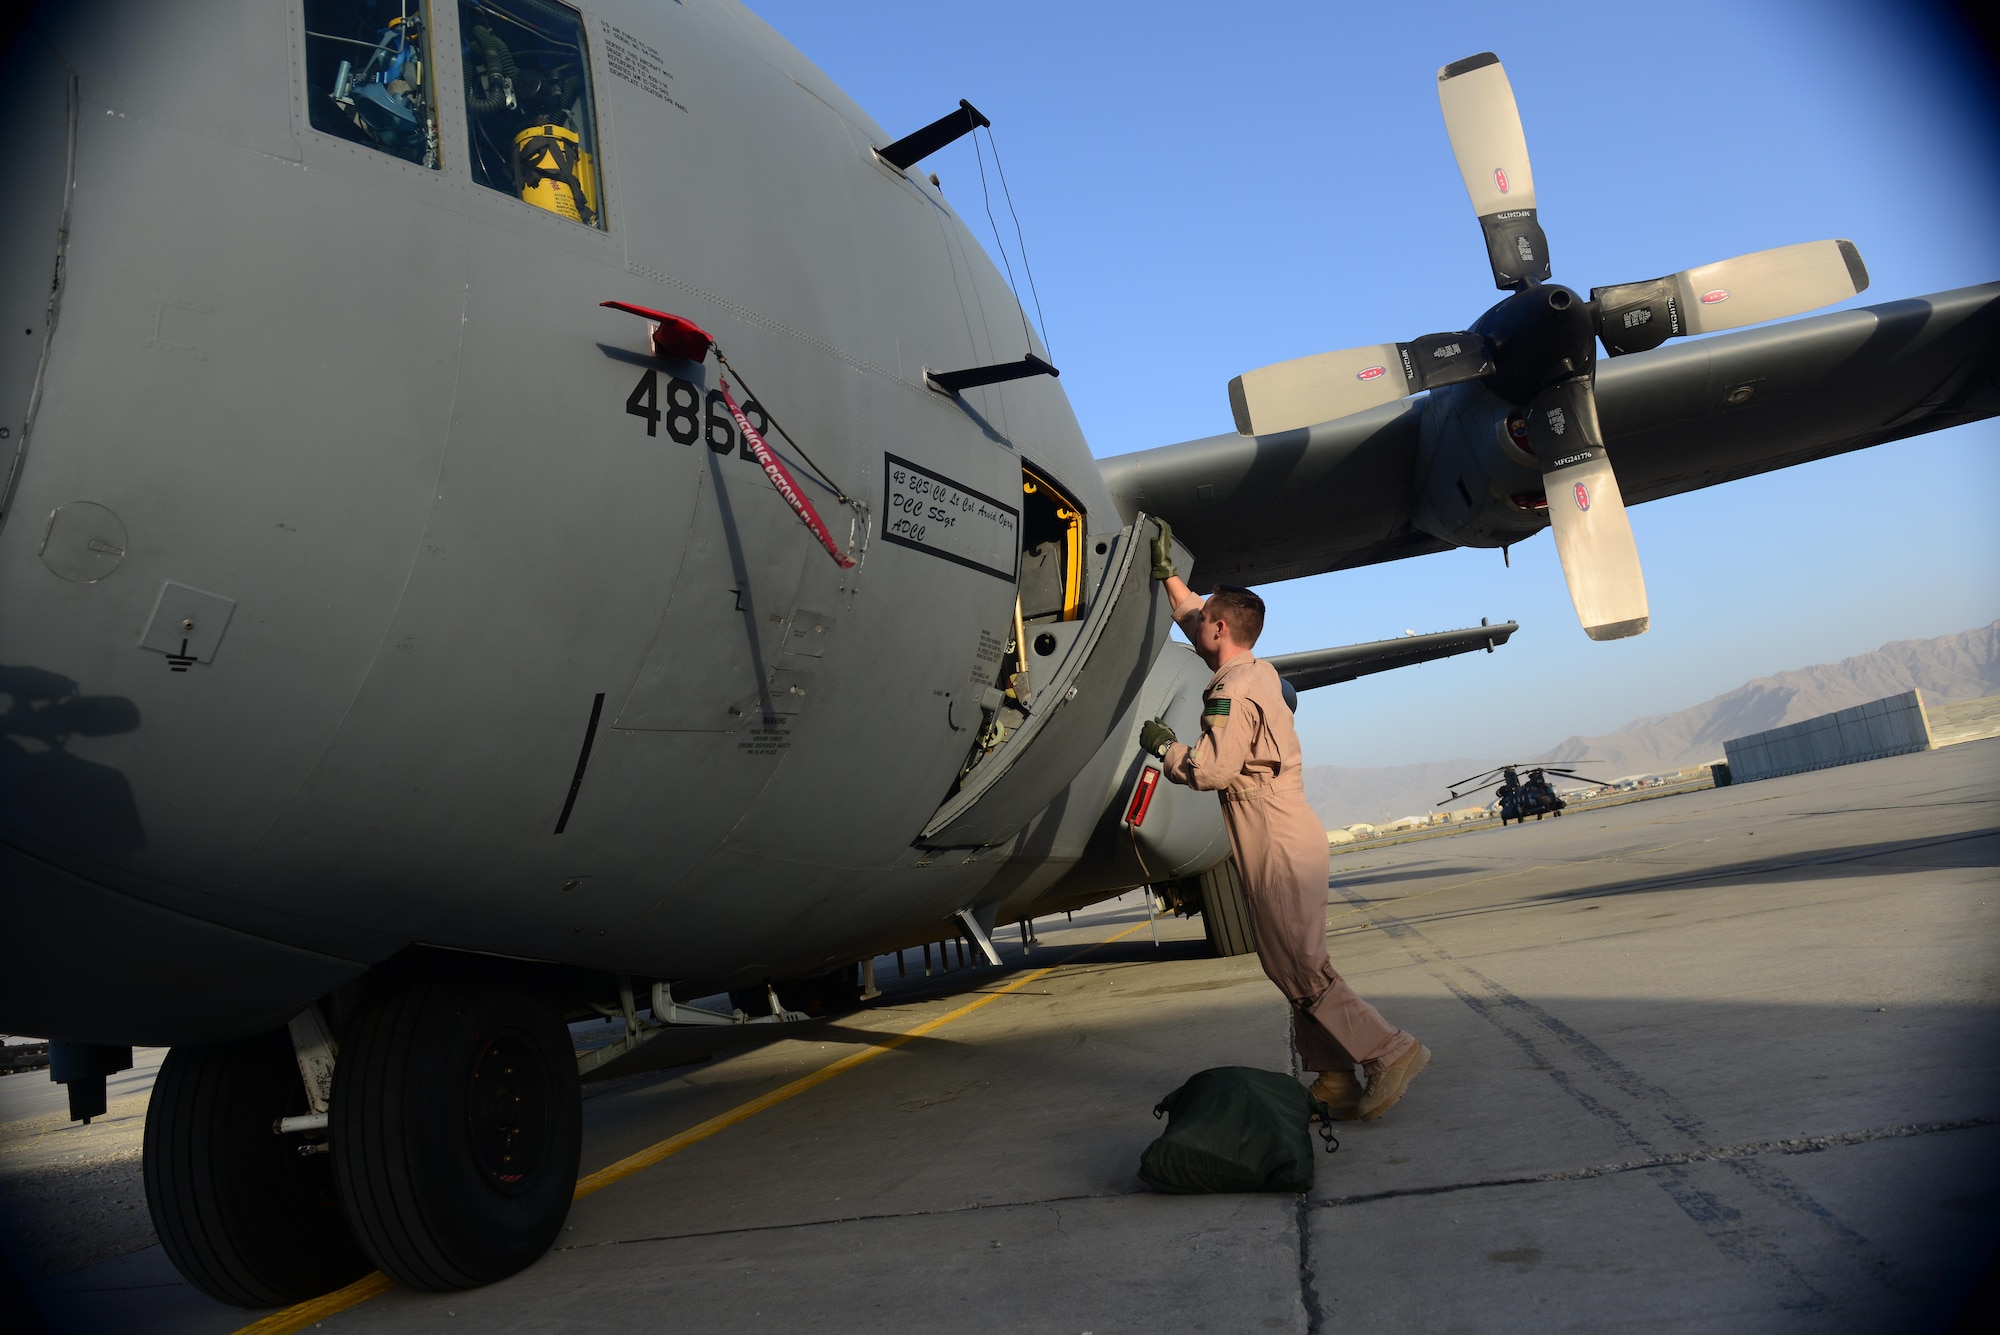 U.S. Air Force Capt. Frank Von Heiland, 41st Expeditionary Electronic Combat Squadron co-pilot, opens a crew door of an EC-130H Compass Call aircraft at Bagram Airfield, Afghanistan Sept. 12, 2014.  The 41 EECS provides premier counter-communications electronic attack capabilities. Von Heiland is deployed from Davis-Monthan Air Force Base, Ariz. and a native of Anaheim, Calif. (U.S. Air Force photo by Staff Sgt. Evelyn Chavez/Released)